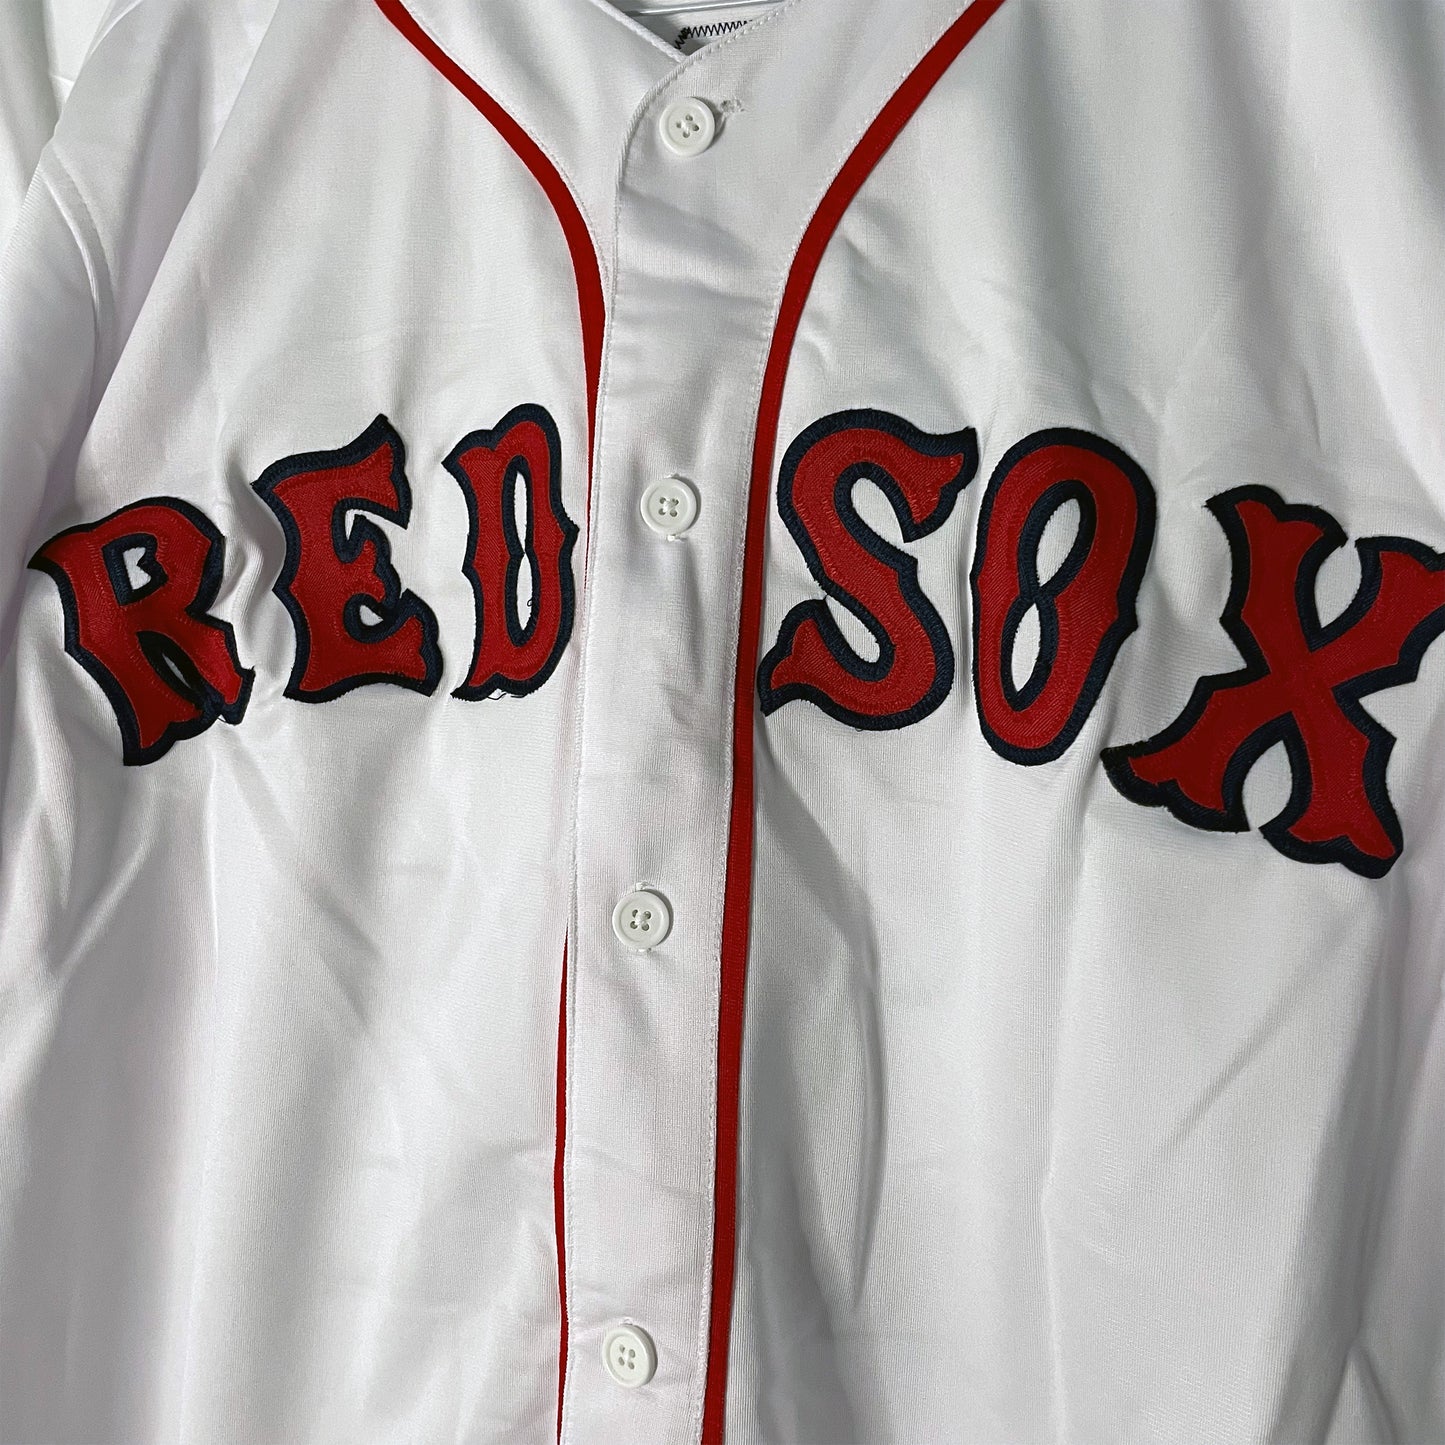 Autographed Red Sox Jersey- Jose Canseco #33